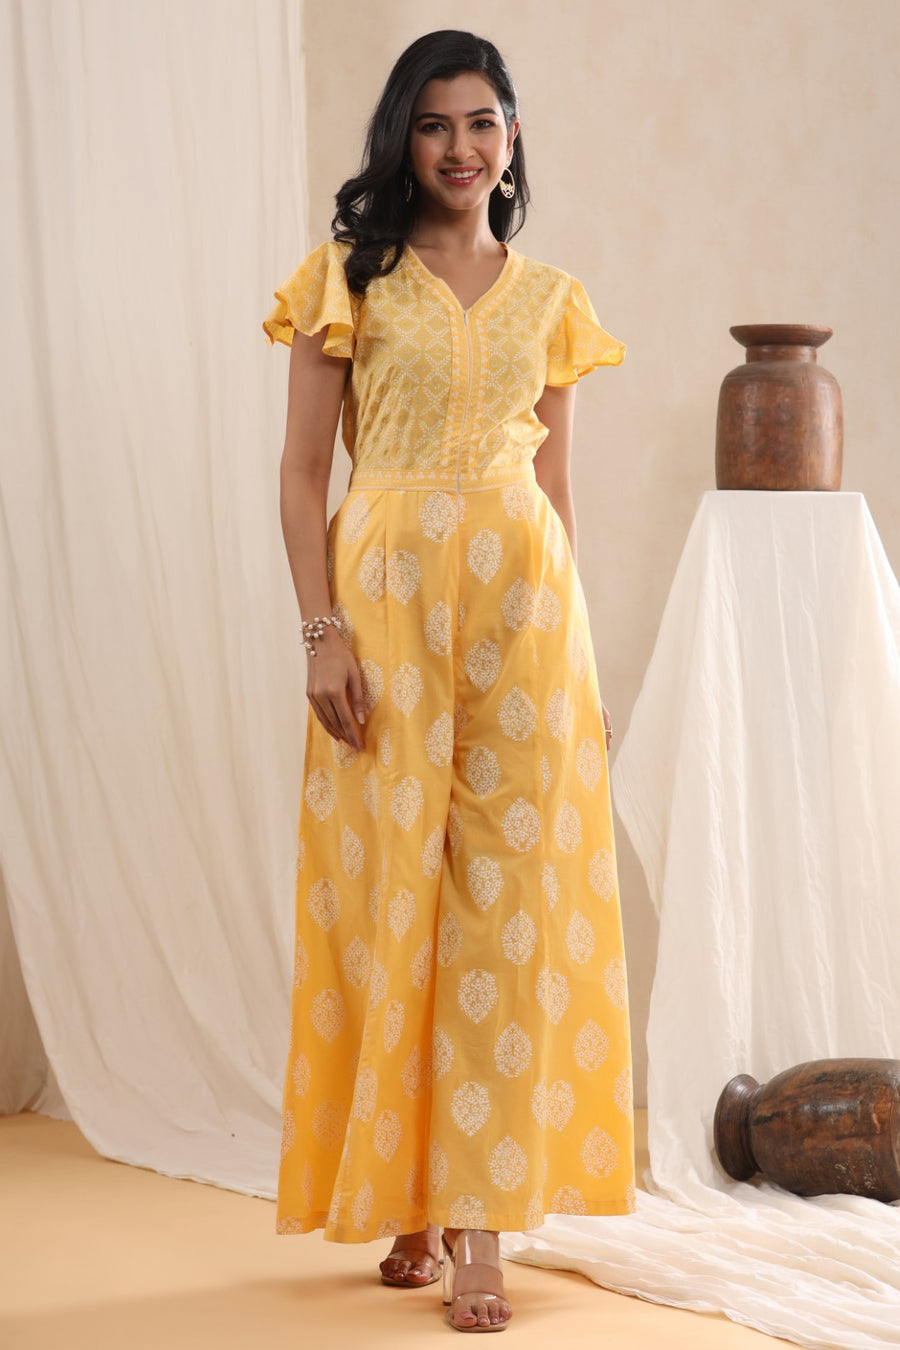 Aaronee's Indo Western Jumpsuits in Cotton Fabric